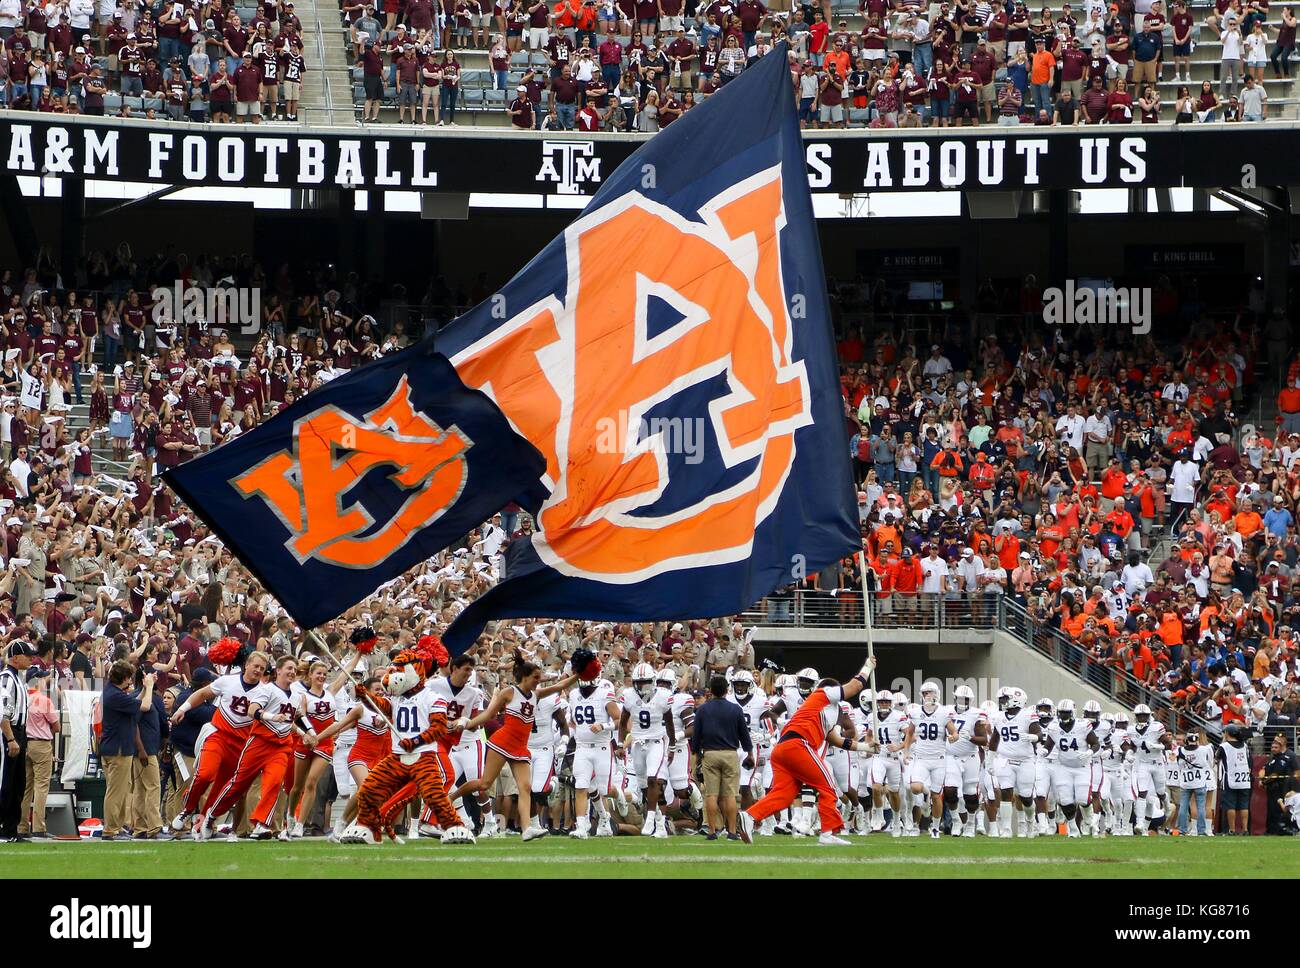 November 4, 2017: Auburn Tigers cheerleaders and mascot runout with the flags at the start of the game against the Texas A&M Aggies during the NCAA football game between the Auburn Tigers and the Texas A&M Aggies at Kyle Field in College Station, TX; John Glaser/CSM. Stock Photo